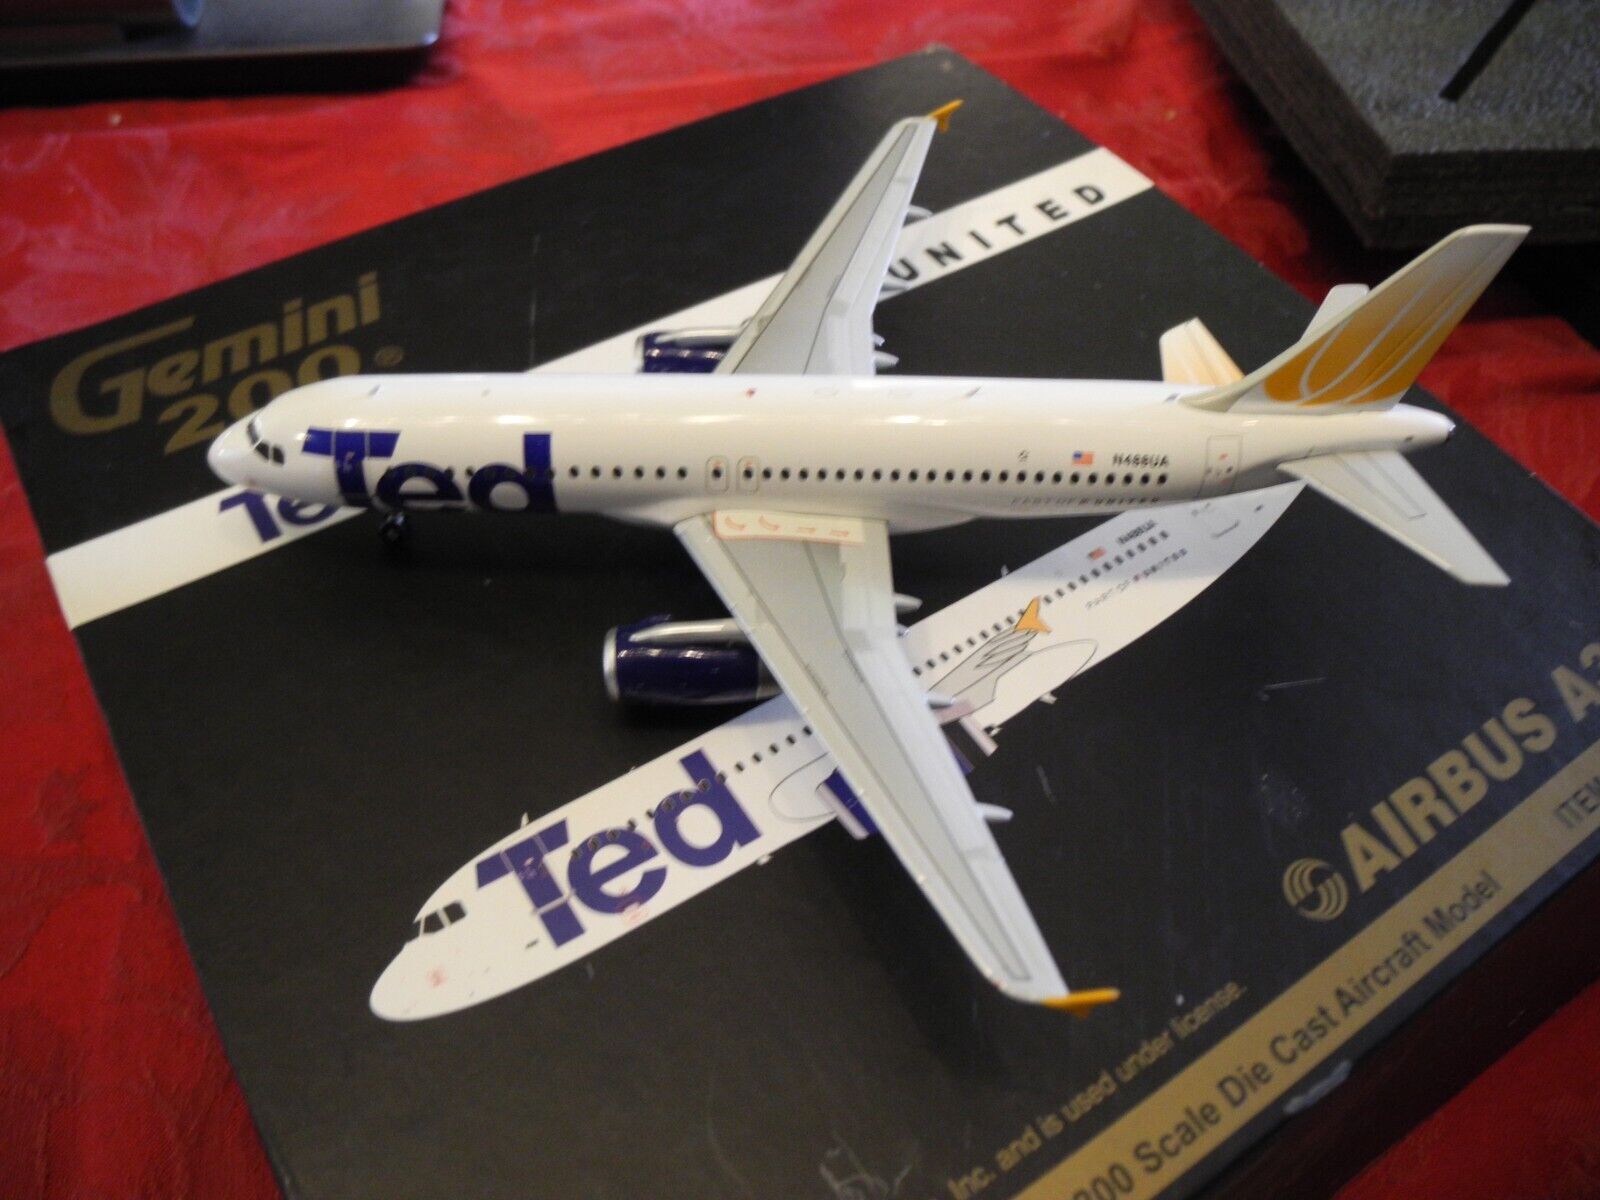 Extremely RARE Gemini 200 Airbus A320 TED, 1:200, Rare, NIB, RETIRED